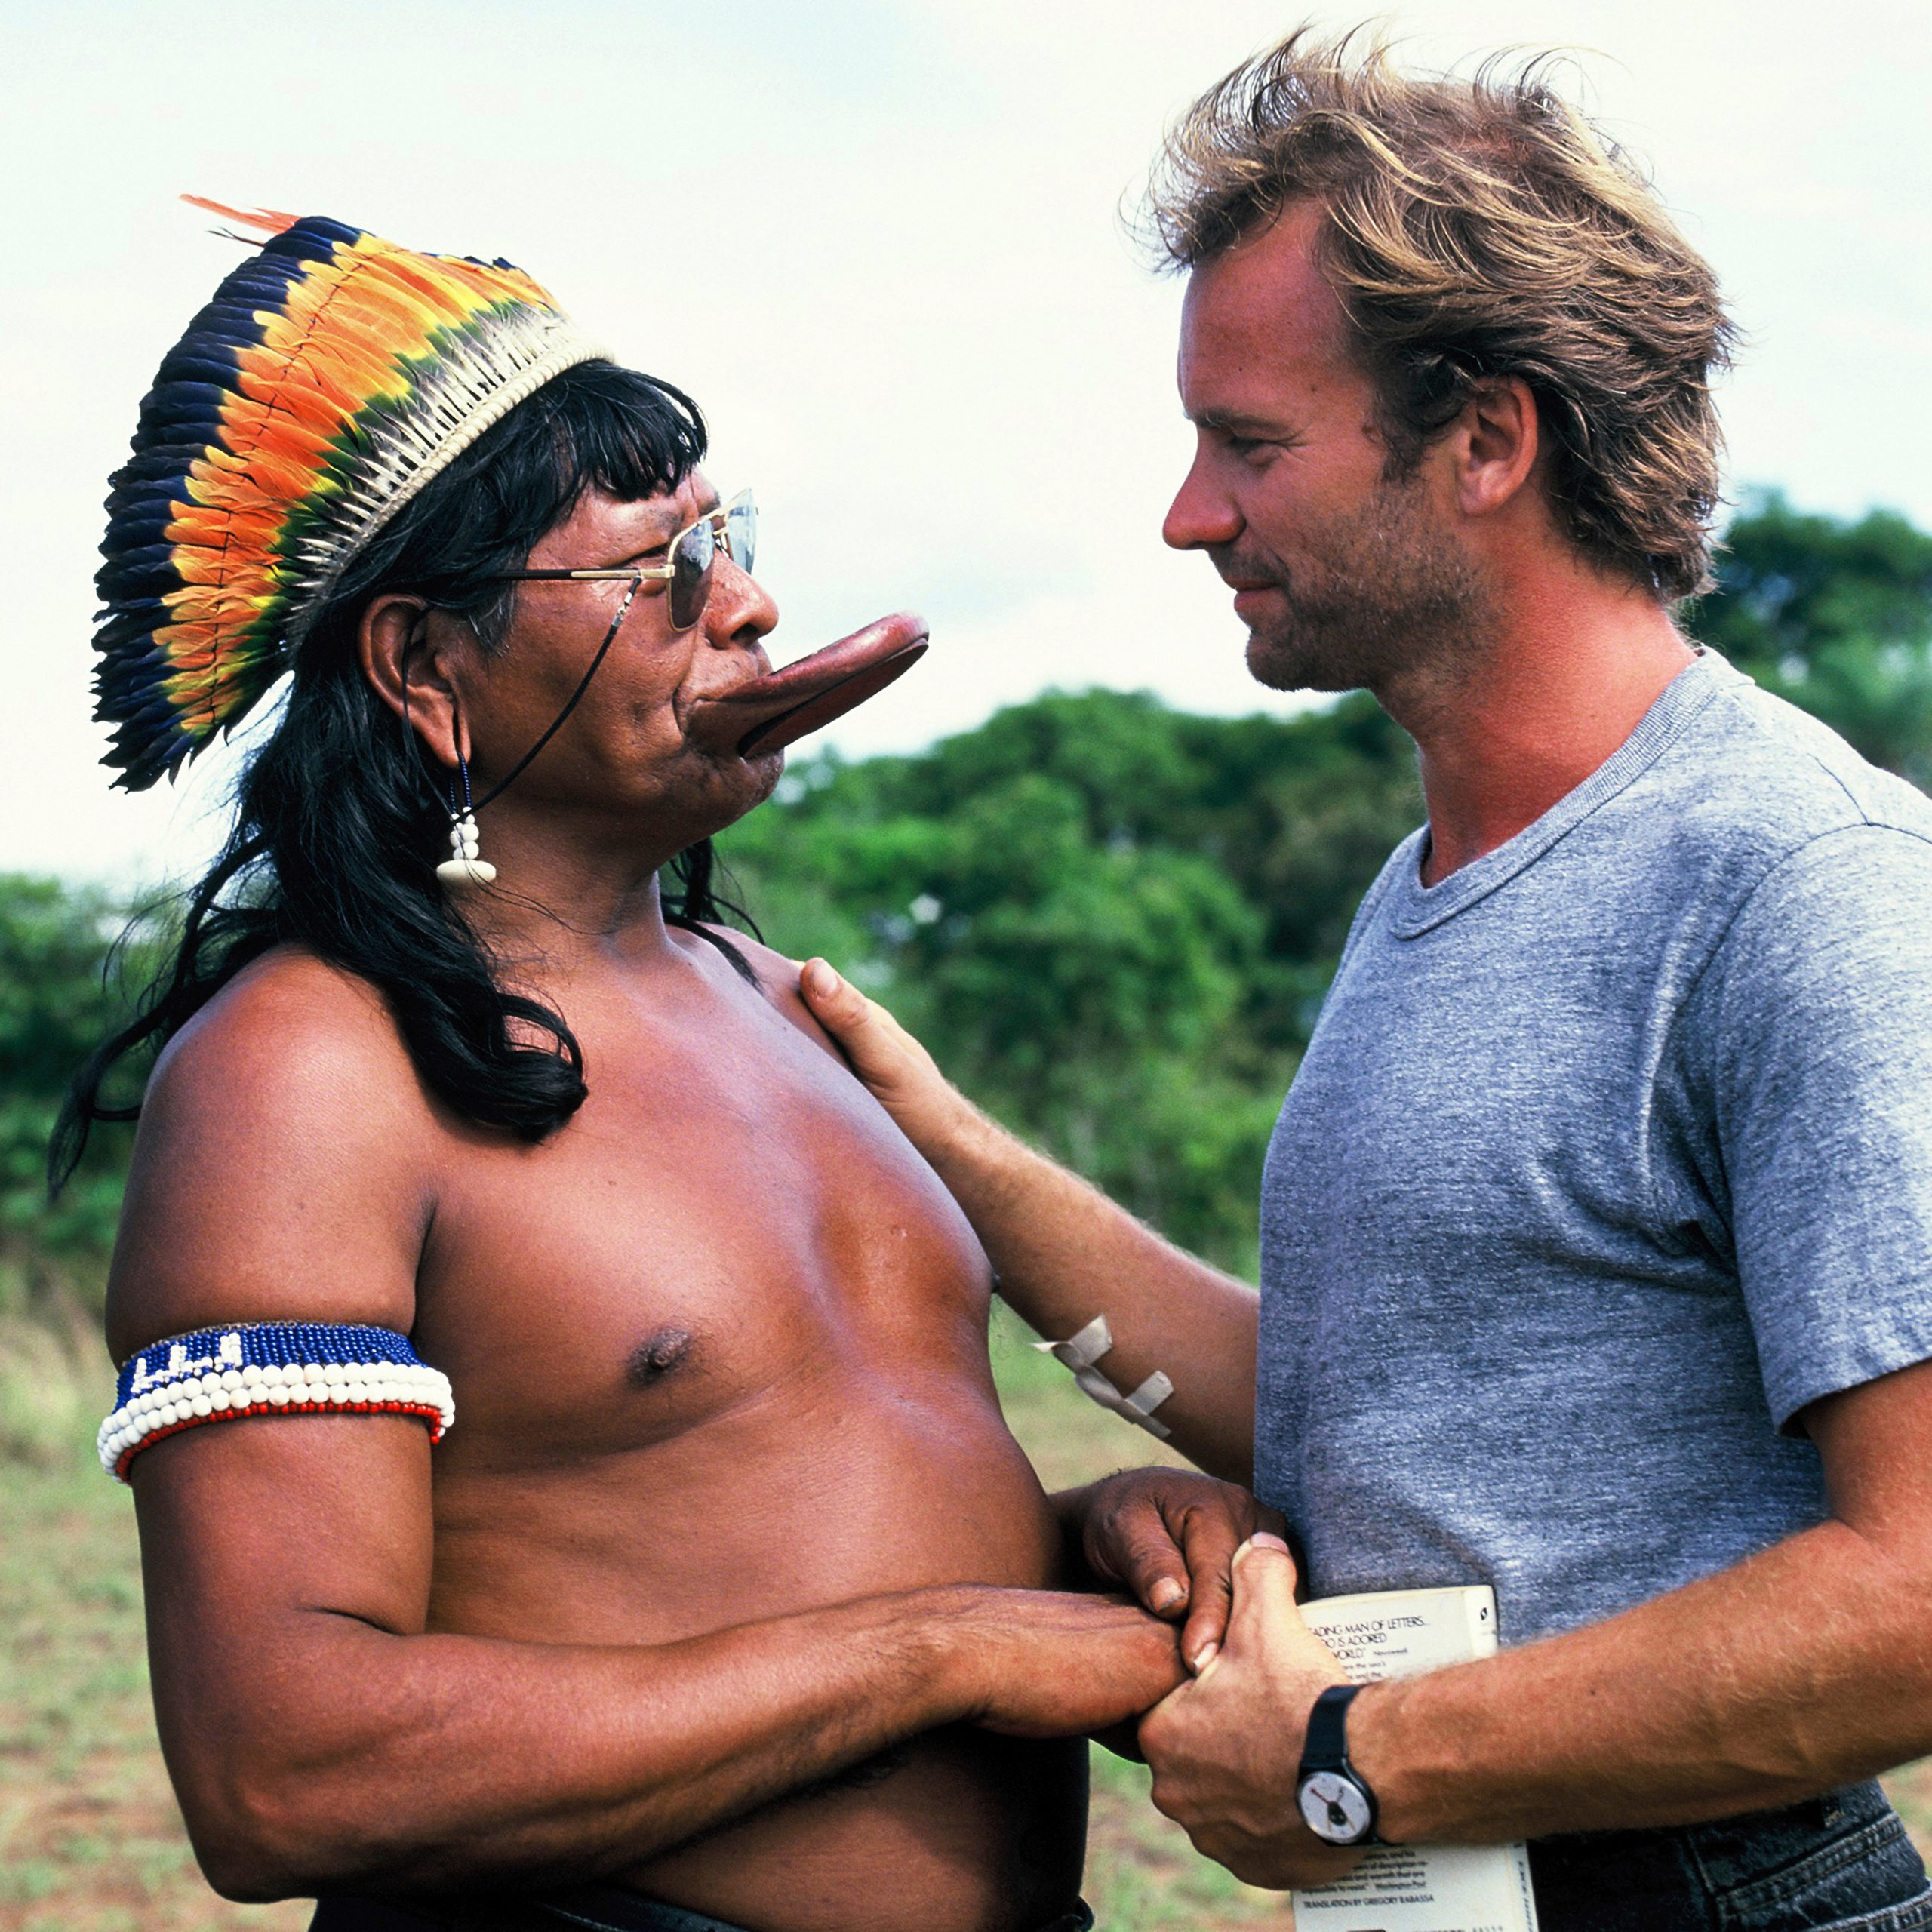 Historical image from the late 1980's of Sting shaking hands with Chief Raoni of the Kayapo people of Brazil